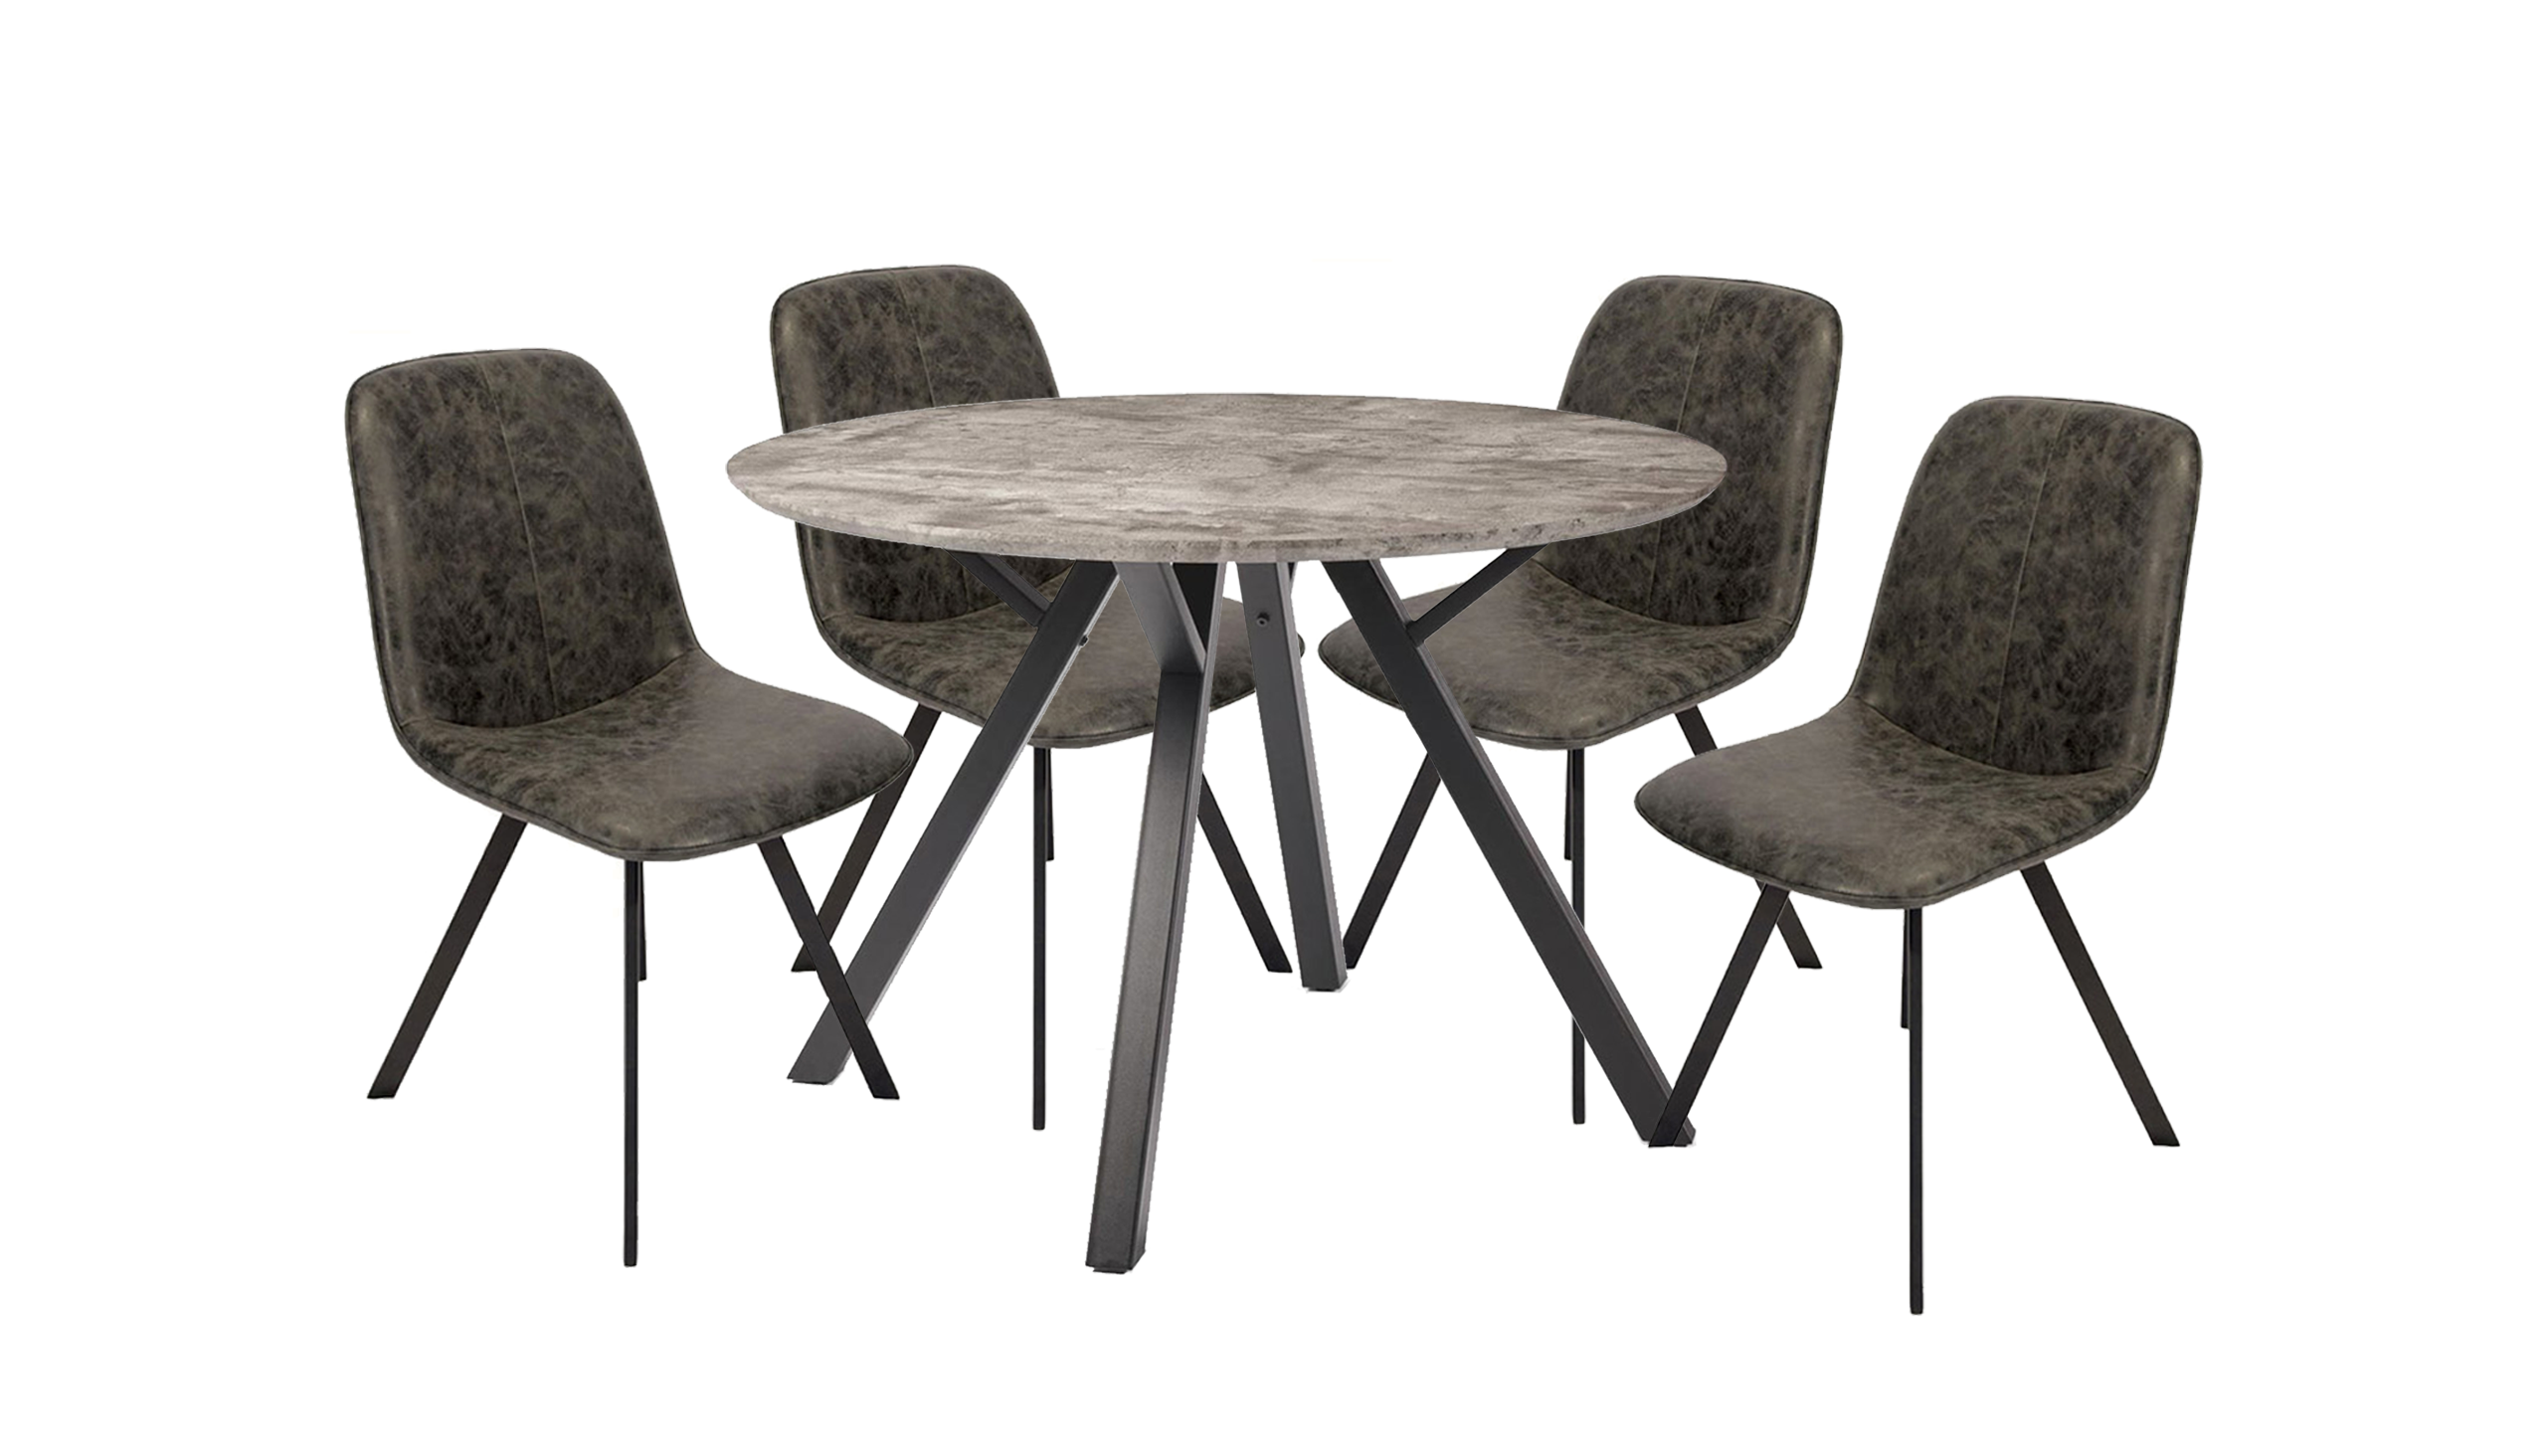 Tetro Round Concrete Effect Dining Table with 4 Dining Chairs